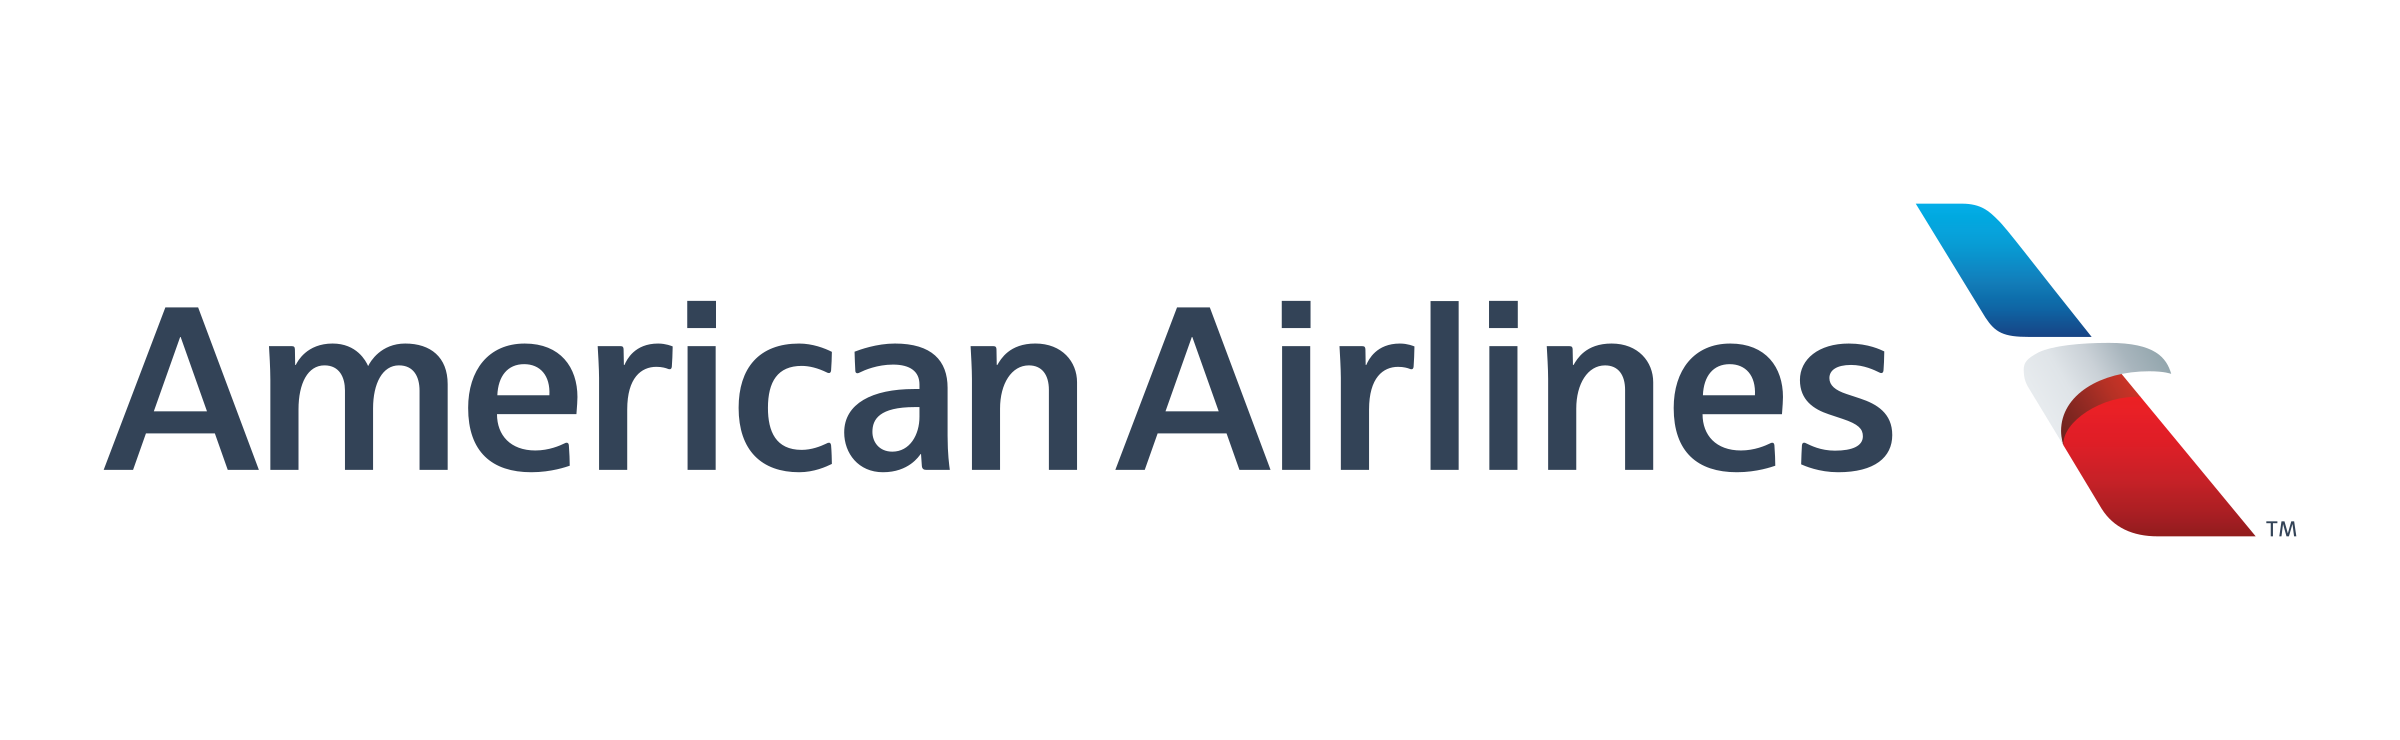 american airlines logo png transparent